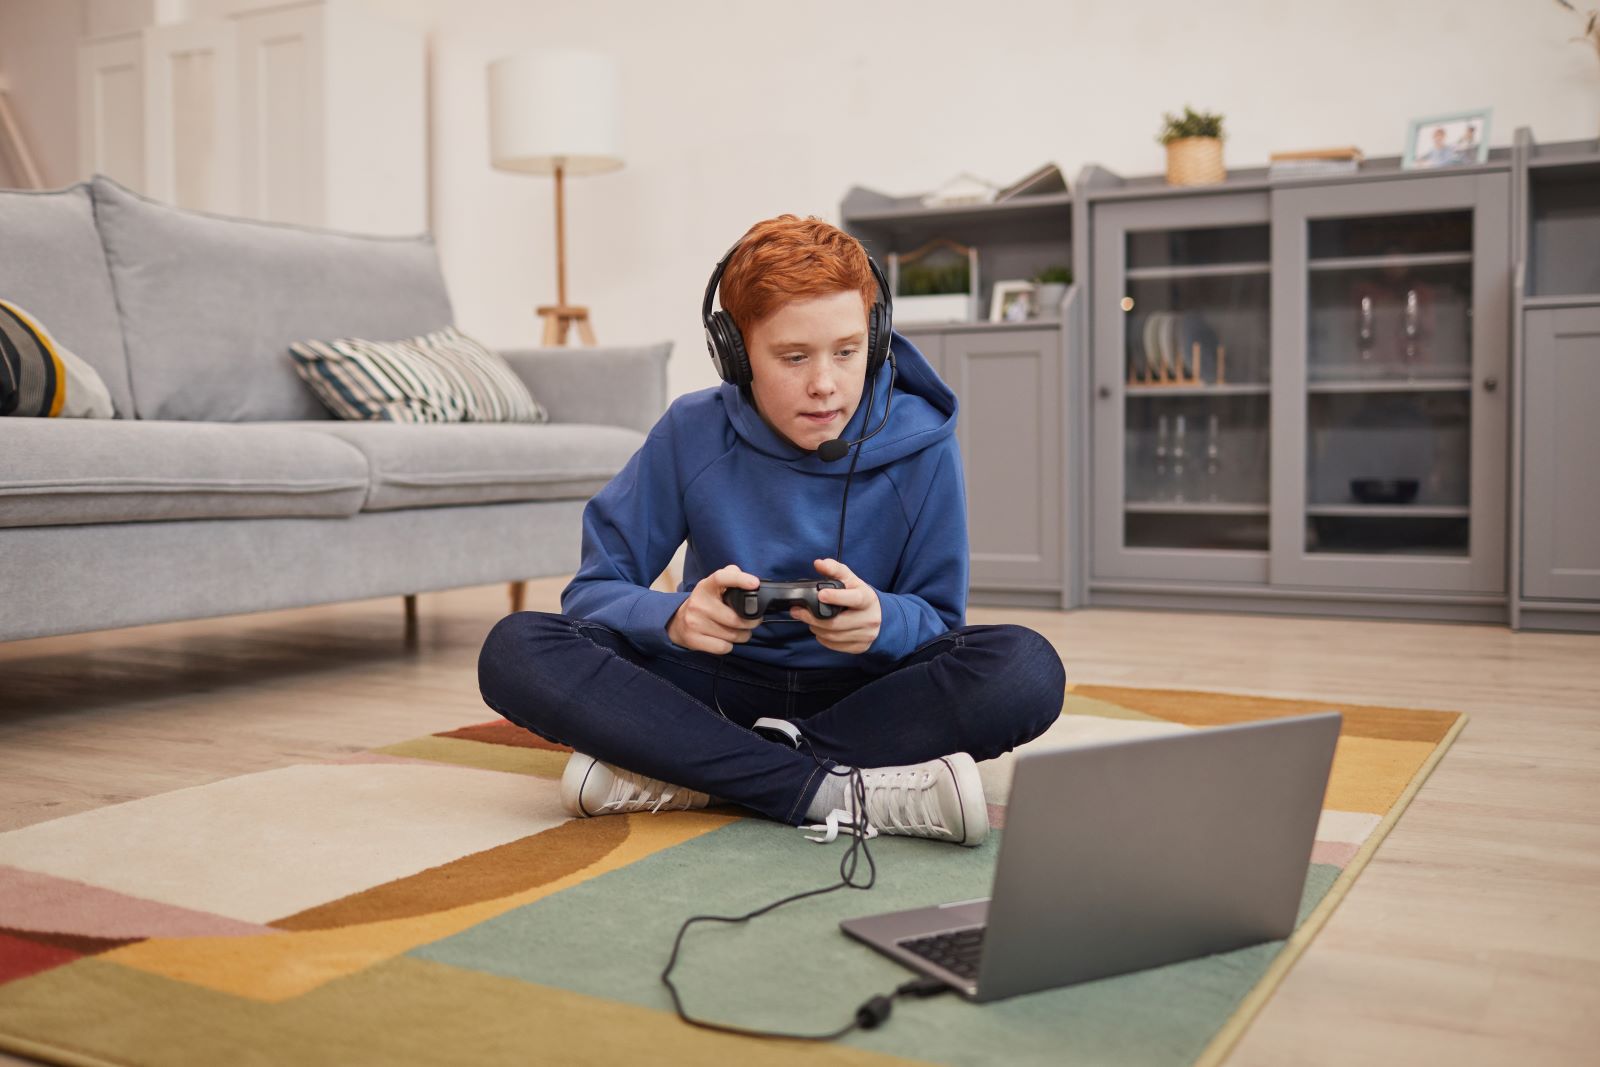 Video Gaming Pros and Cons - What Parents Need to Know